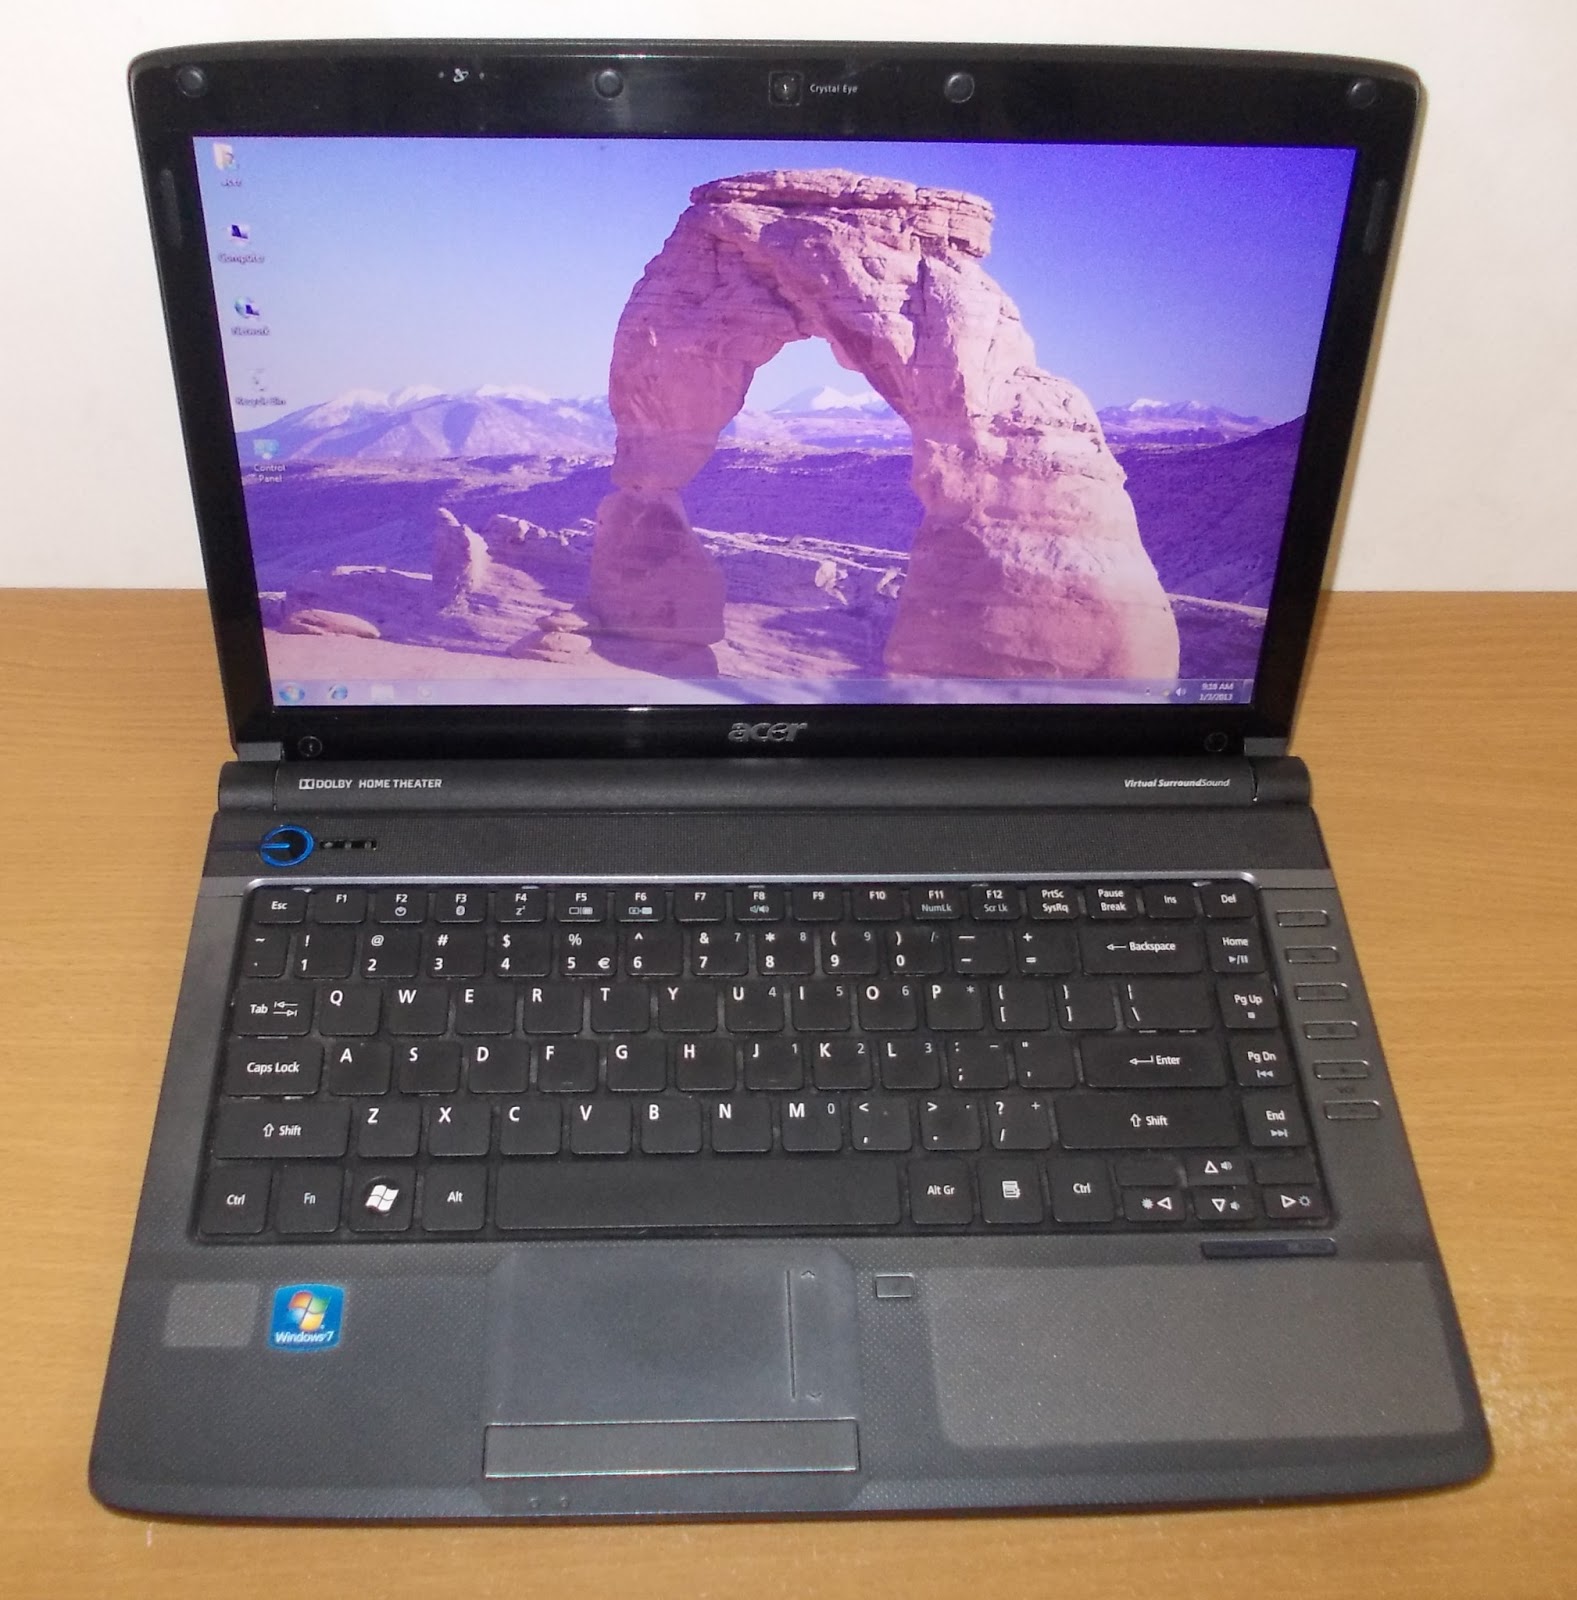 Three A Tech Computer Sales and Services: USED Laptop Acer